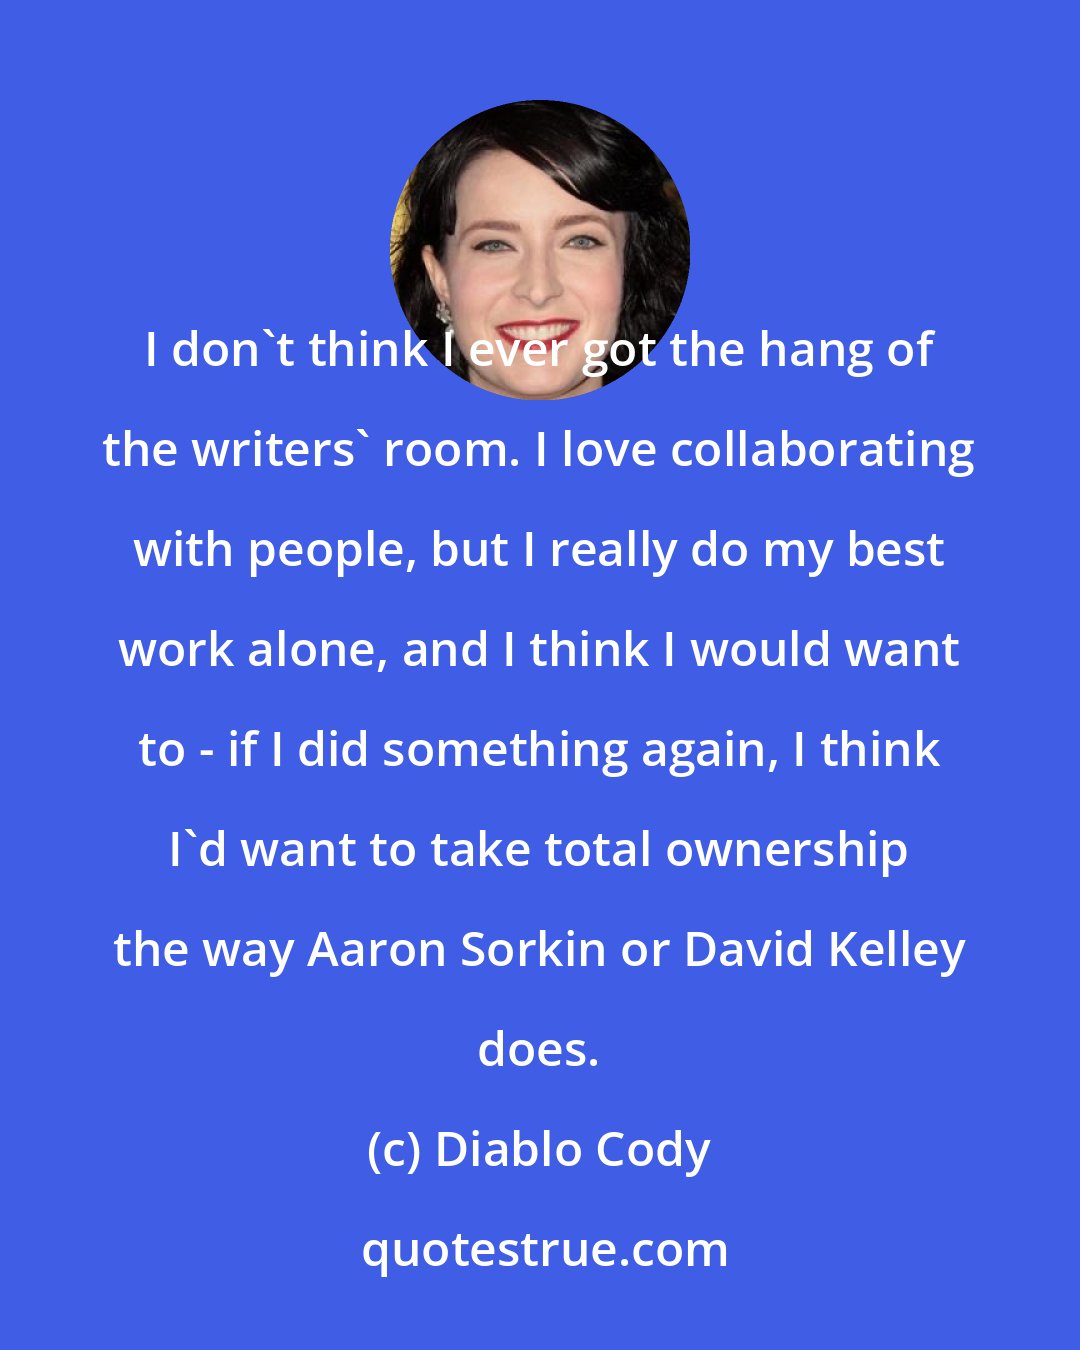 Diablo Cody: I don't think I ever got the hang of the writers' room. I love collaborating with people, but I really do my best work alone, and I think I would want to - if I did something again, I think I'd want to take total ownership the way Aaron Sorkin or David Kelley does.